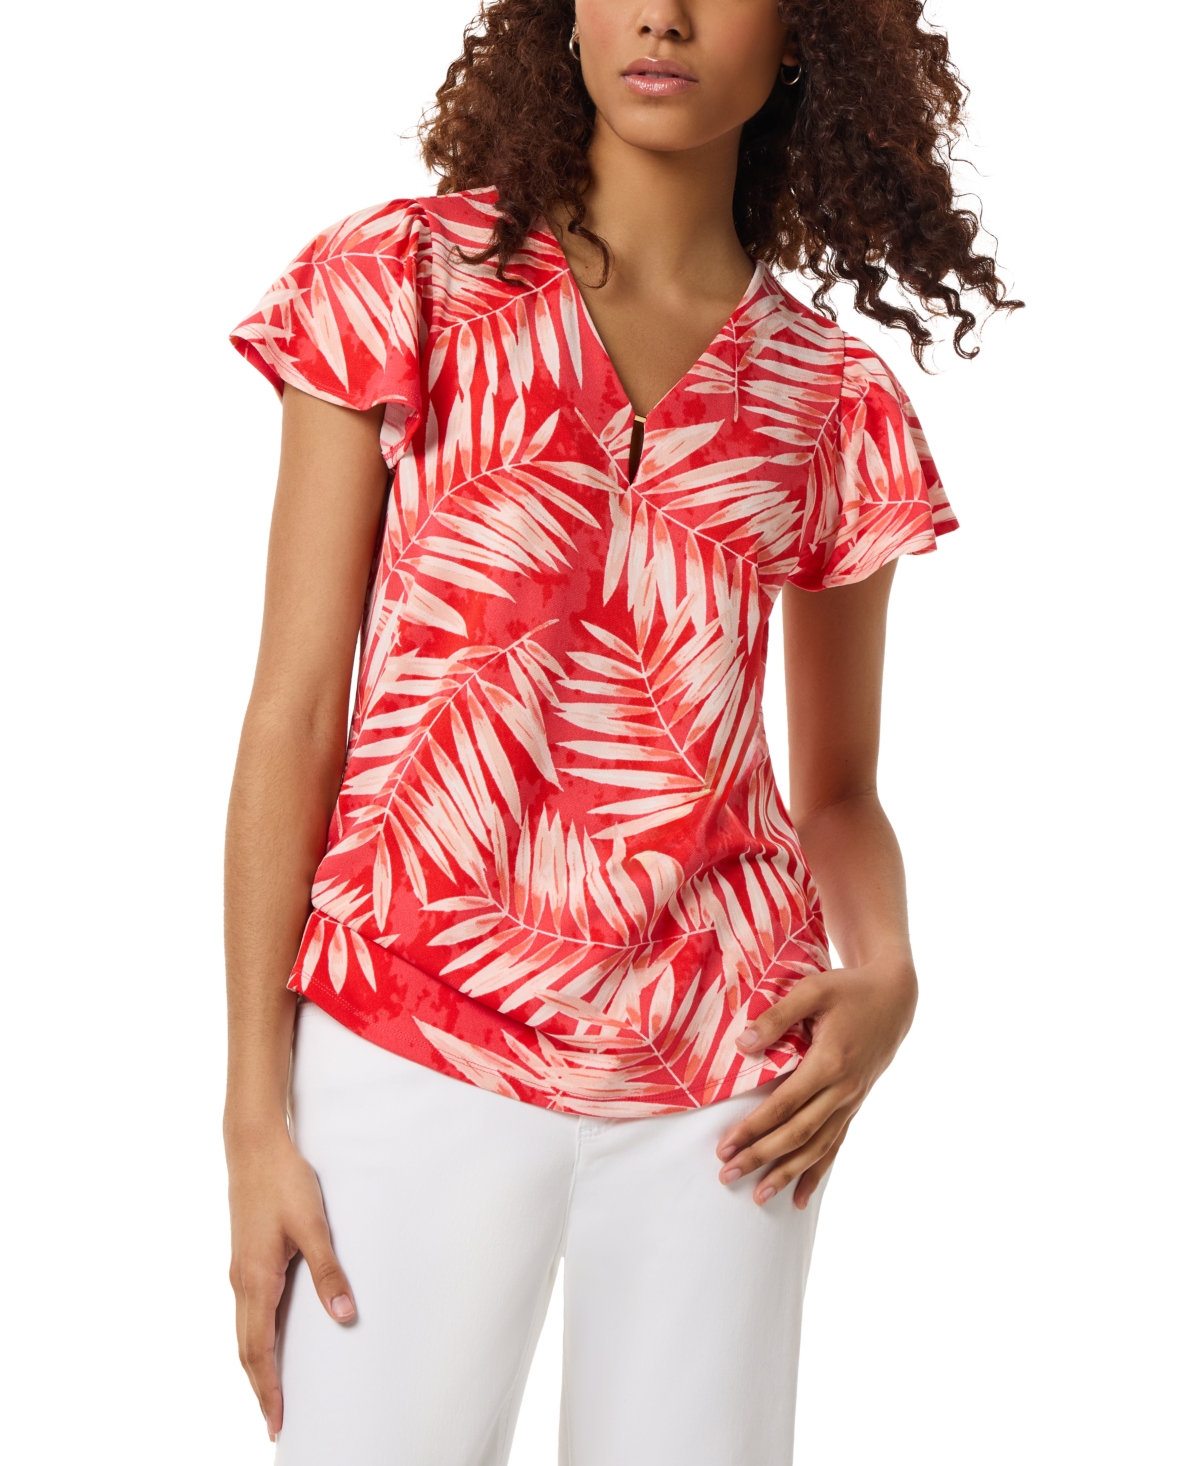 Women's Printed Moss Crepe Short-Sleeve Top - Coral Sun